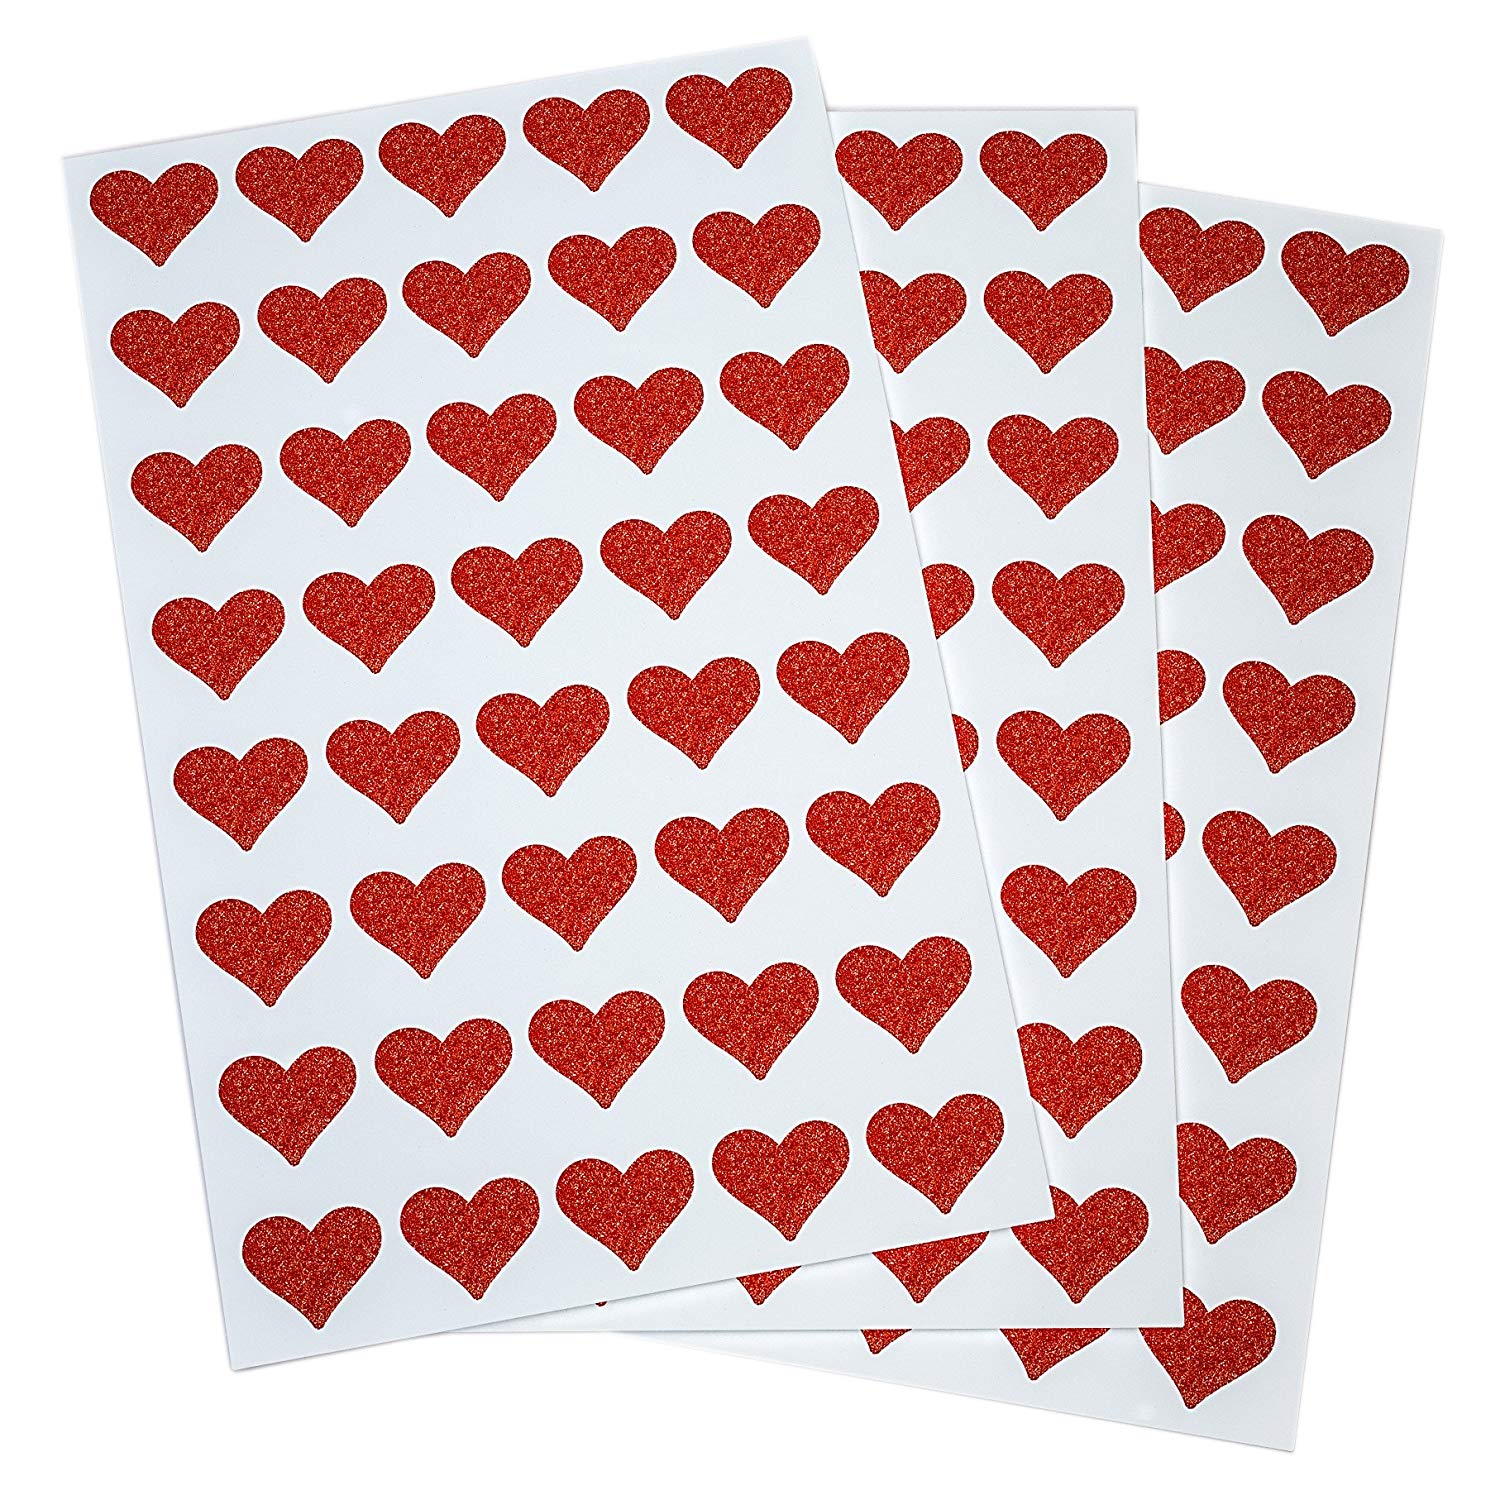 Royal Green Glitter Red Heart Stickers Envelope Seals for Invitations, Favors and Crafts - 200 Pack